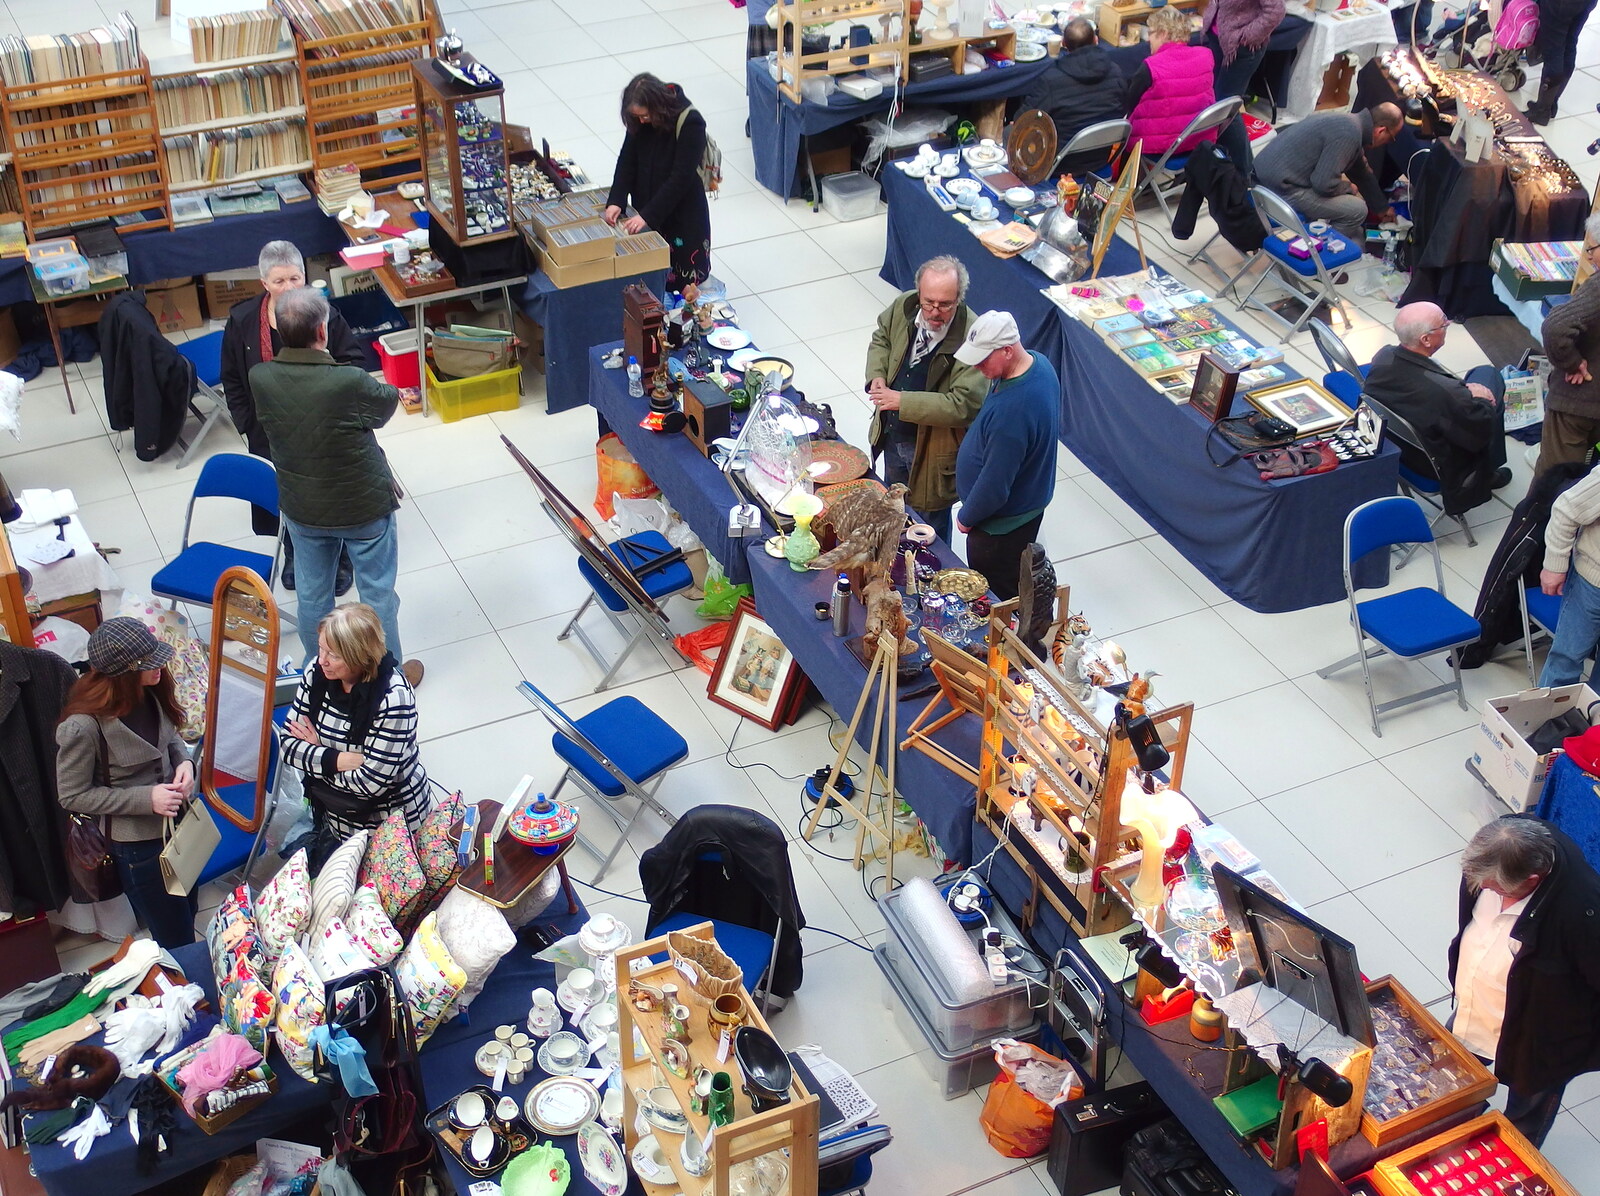 There's an antiques/bric-a-brac market going on from A Dragoney Sort of Day, Norwich, Norfolk - 15th February 2014